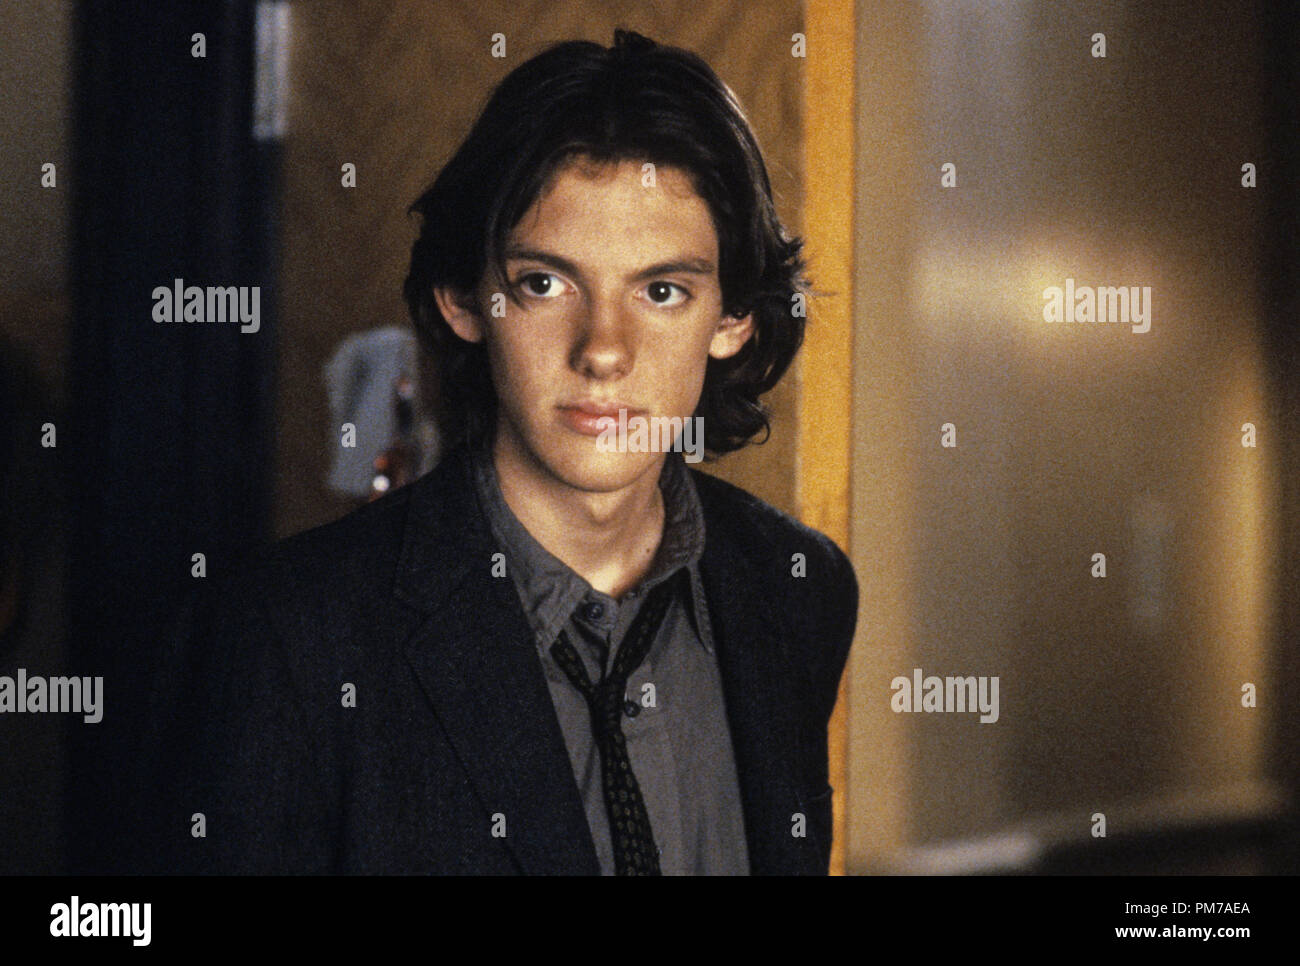 Film Still from "Boys" Lukas Haas © 1996 Touchstone Photo Credit: Demmie Todd    File Reference # 31042681THA  For Editorial Use Only - All Rights Reserved Stock Photo